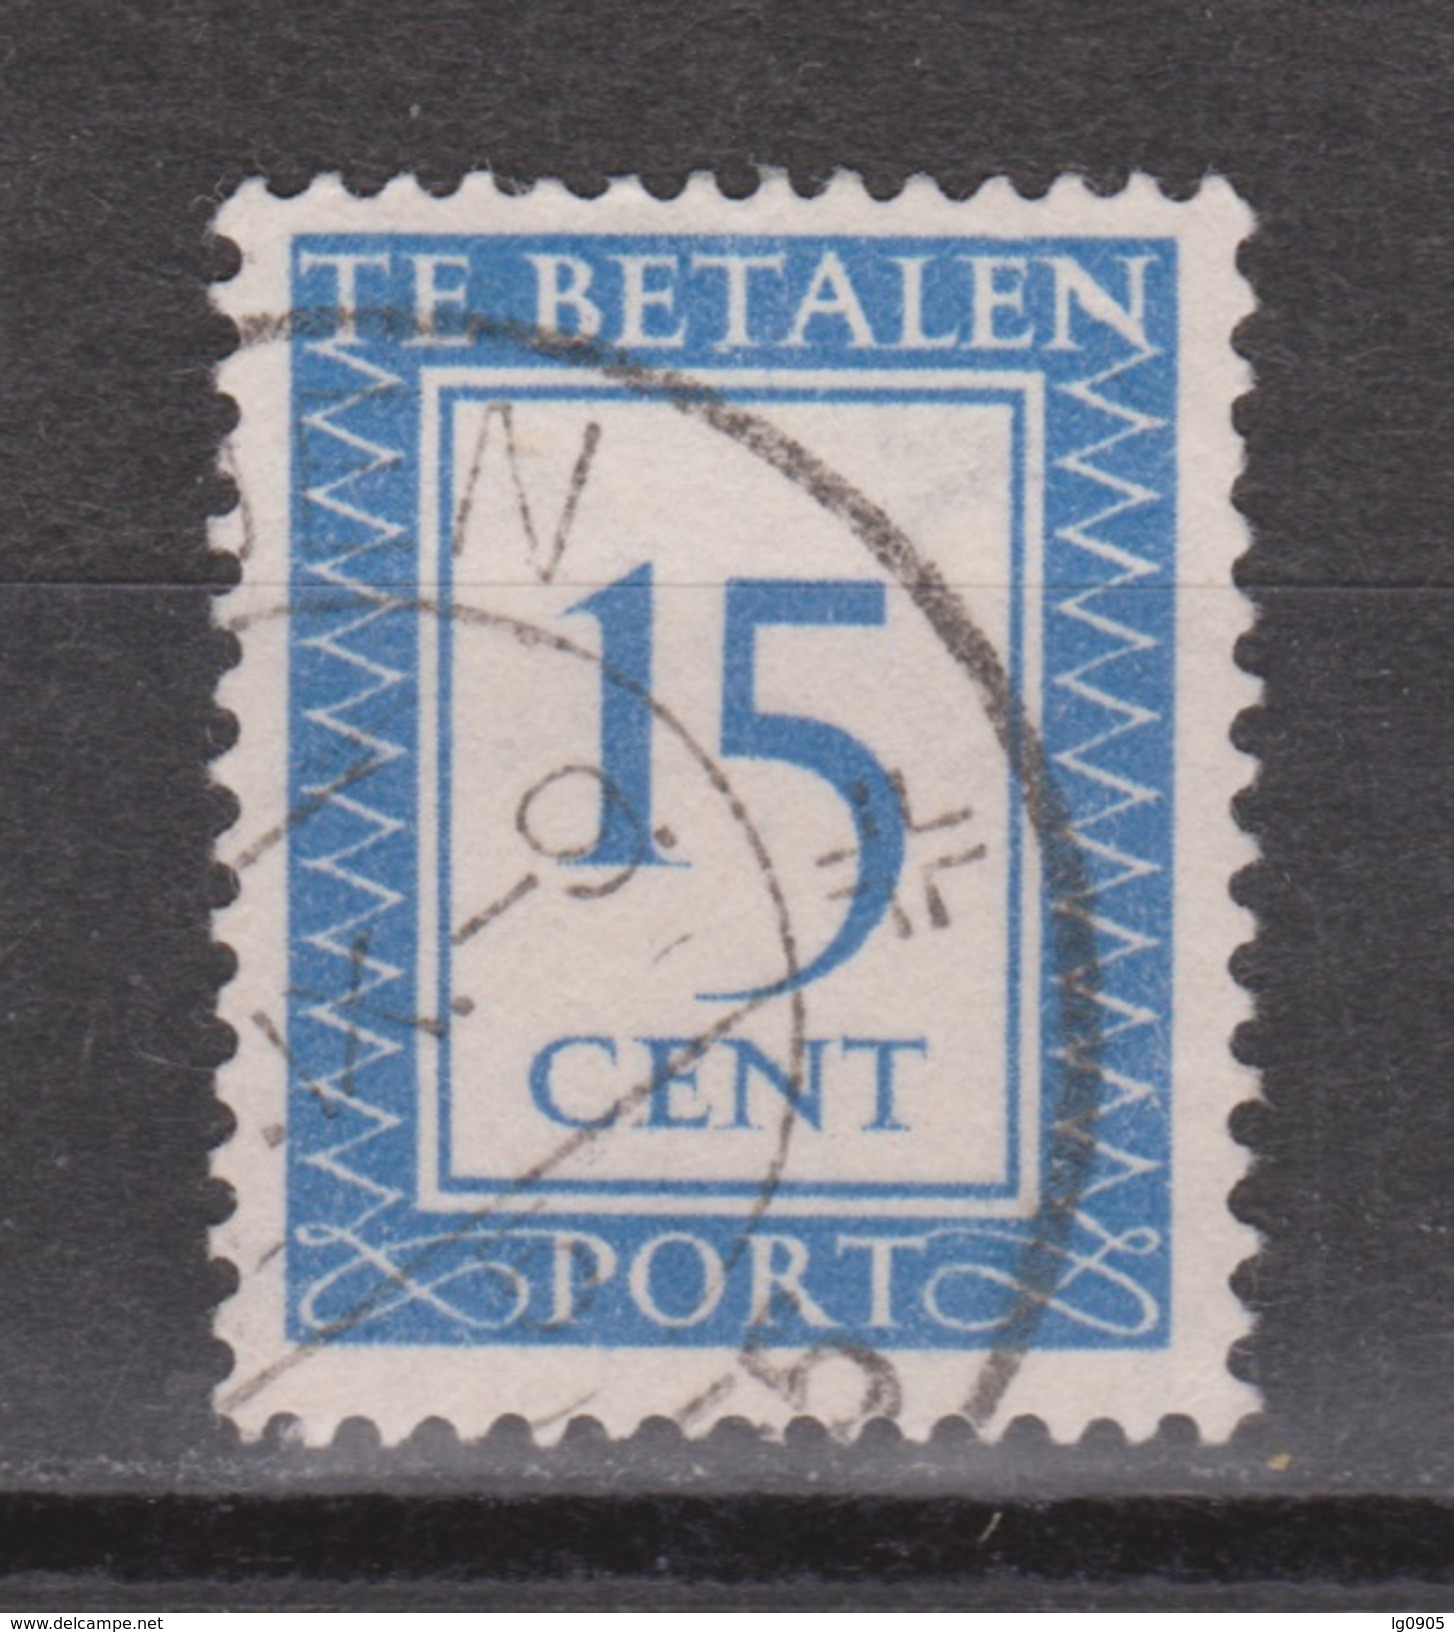 NVPH Nederland Netherlands Holanda Pays Bas Port 91 Used Timbre-taxe, Postmarke, Sellos De Correos NOW MANY DUE STAMPS - Strafportzegels